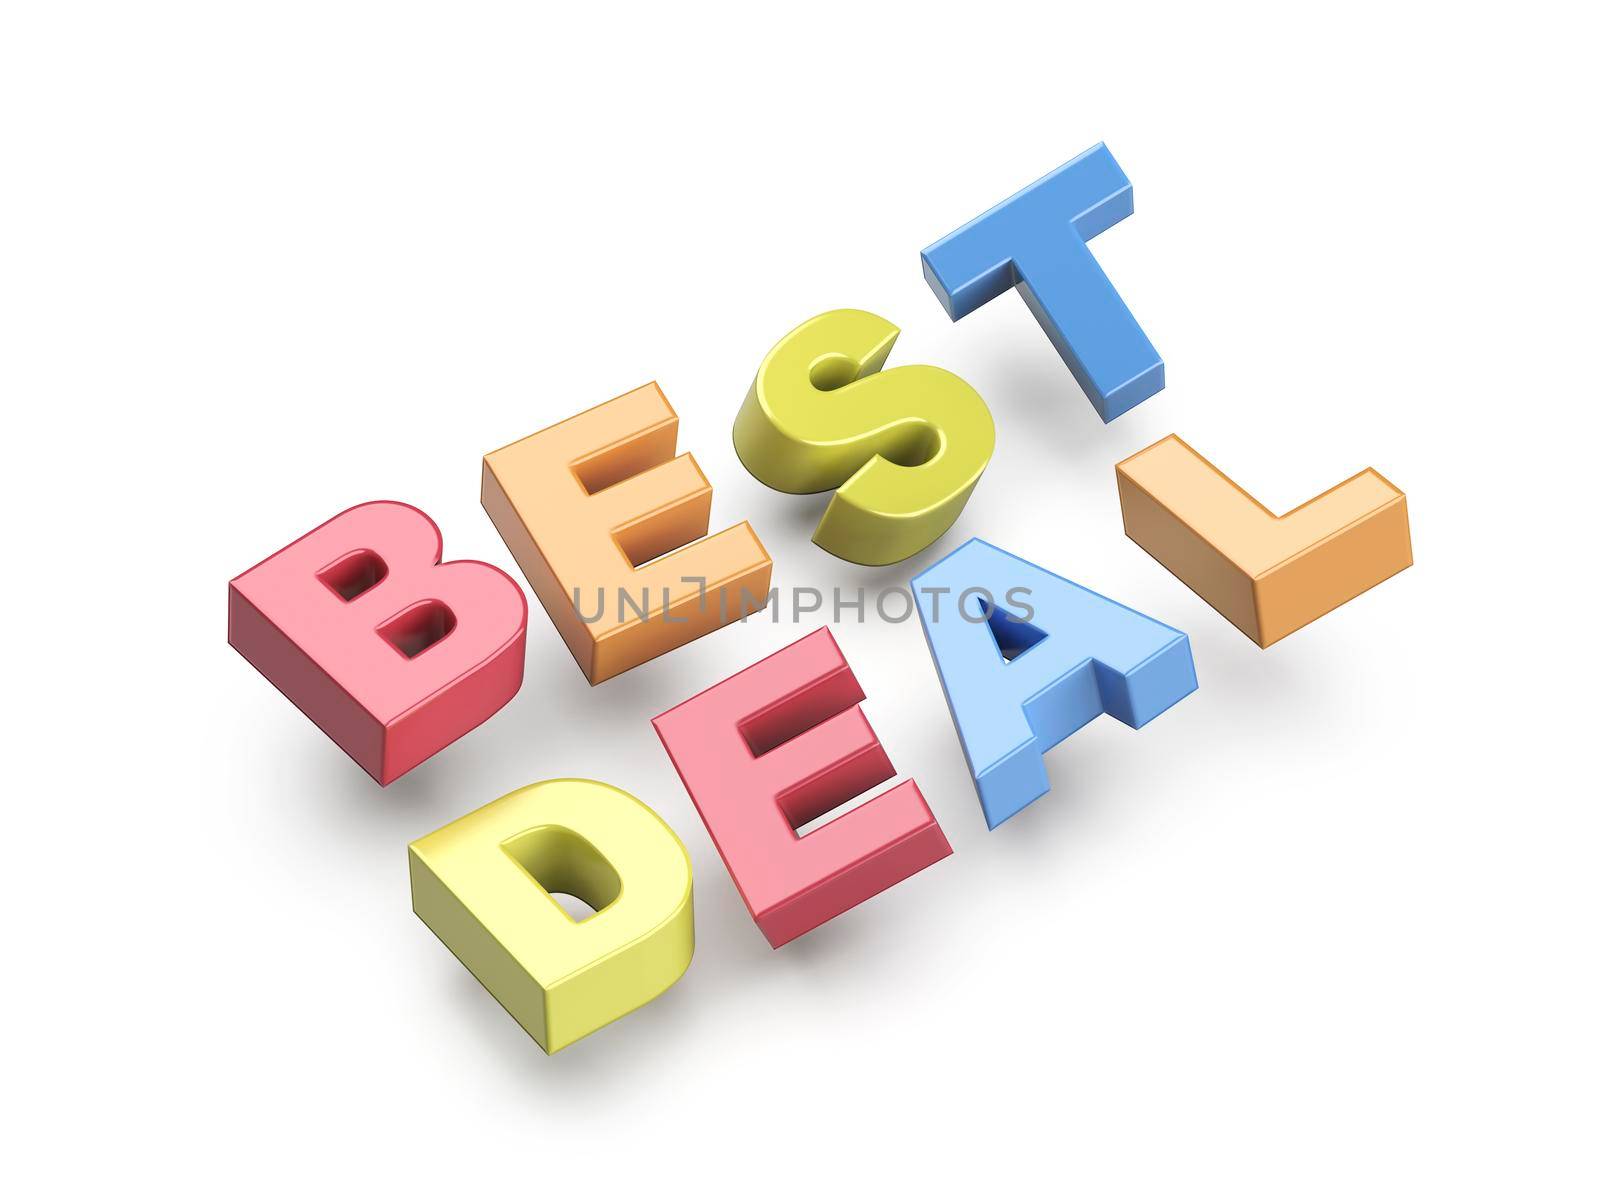 Best deal promo text by magraphics